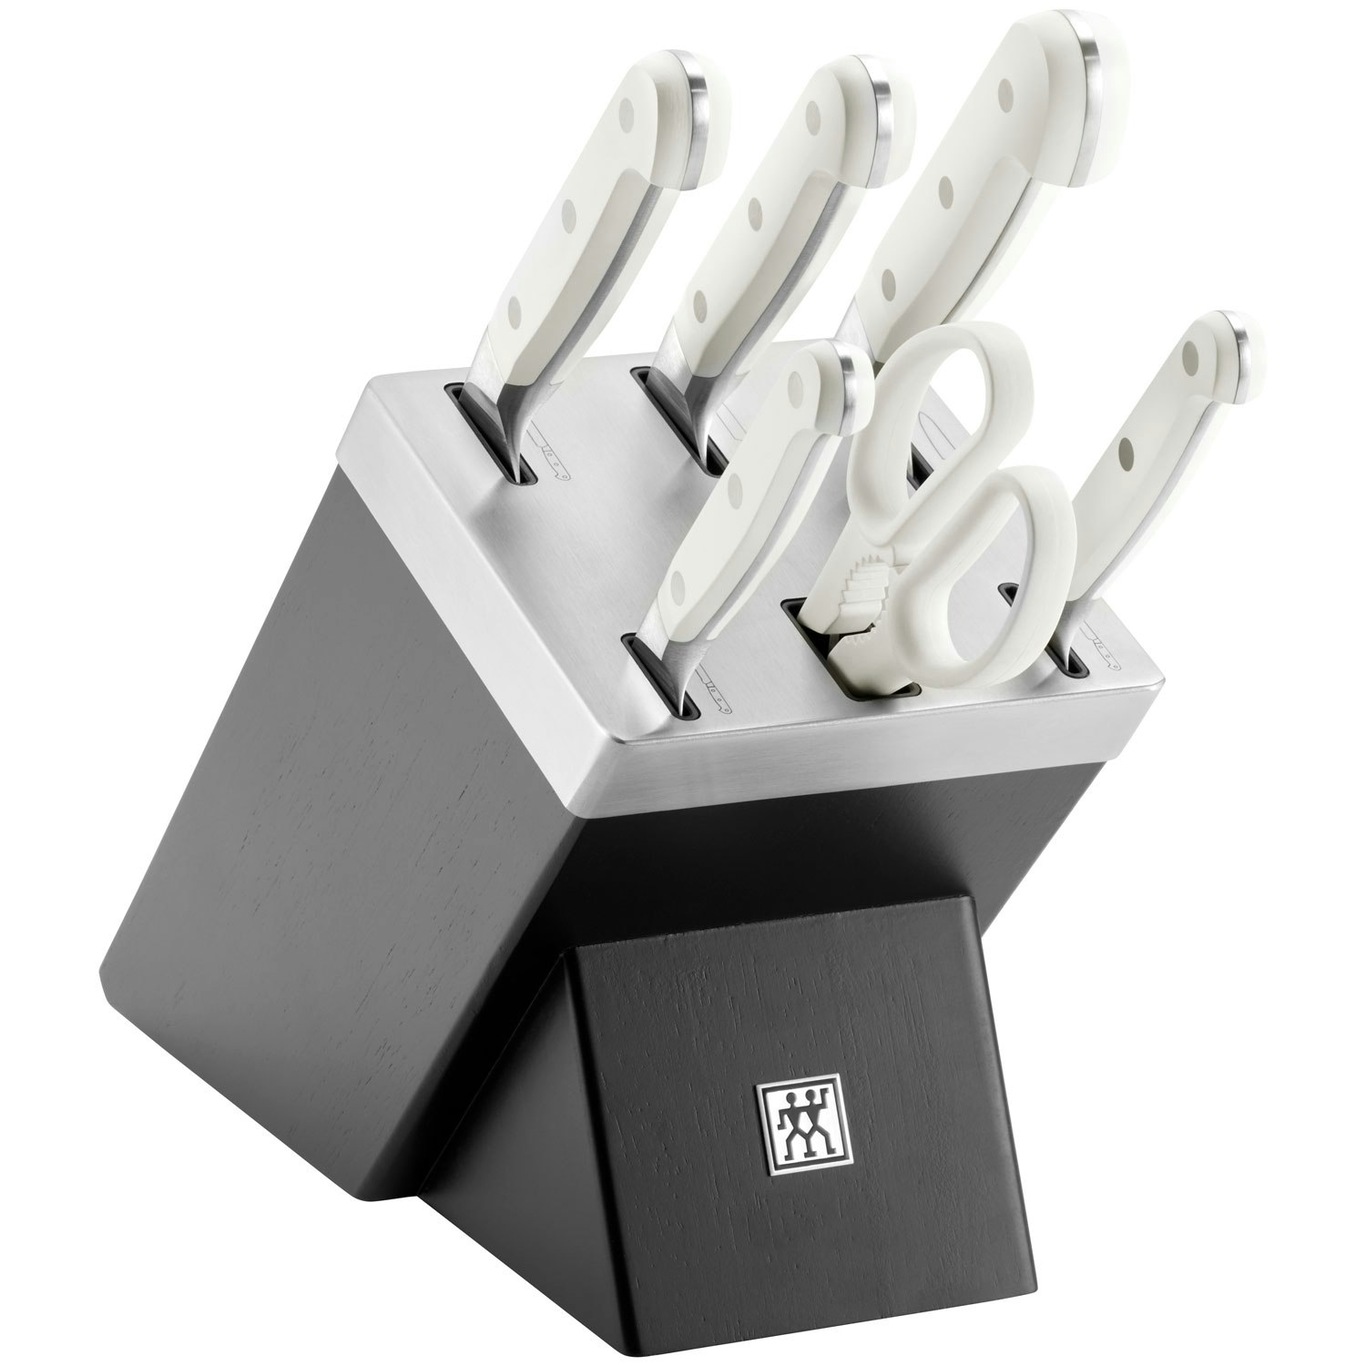 https://royaldesign.com/image/2/zwilling-pro-le-blanc-knife-block-with-knives-7-pieces-0?w=800&quality=80